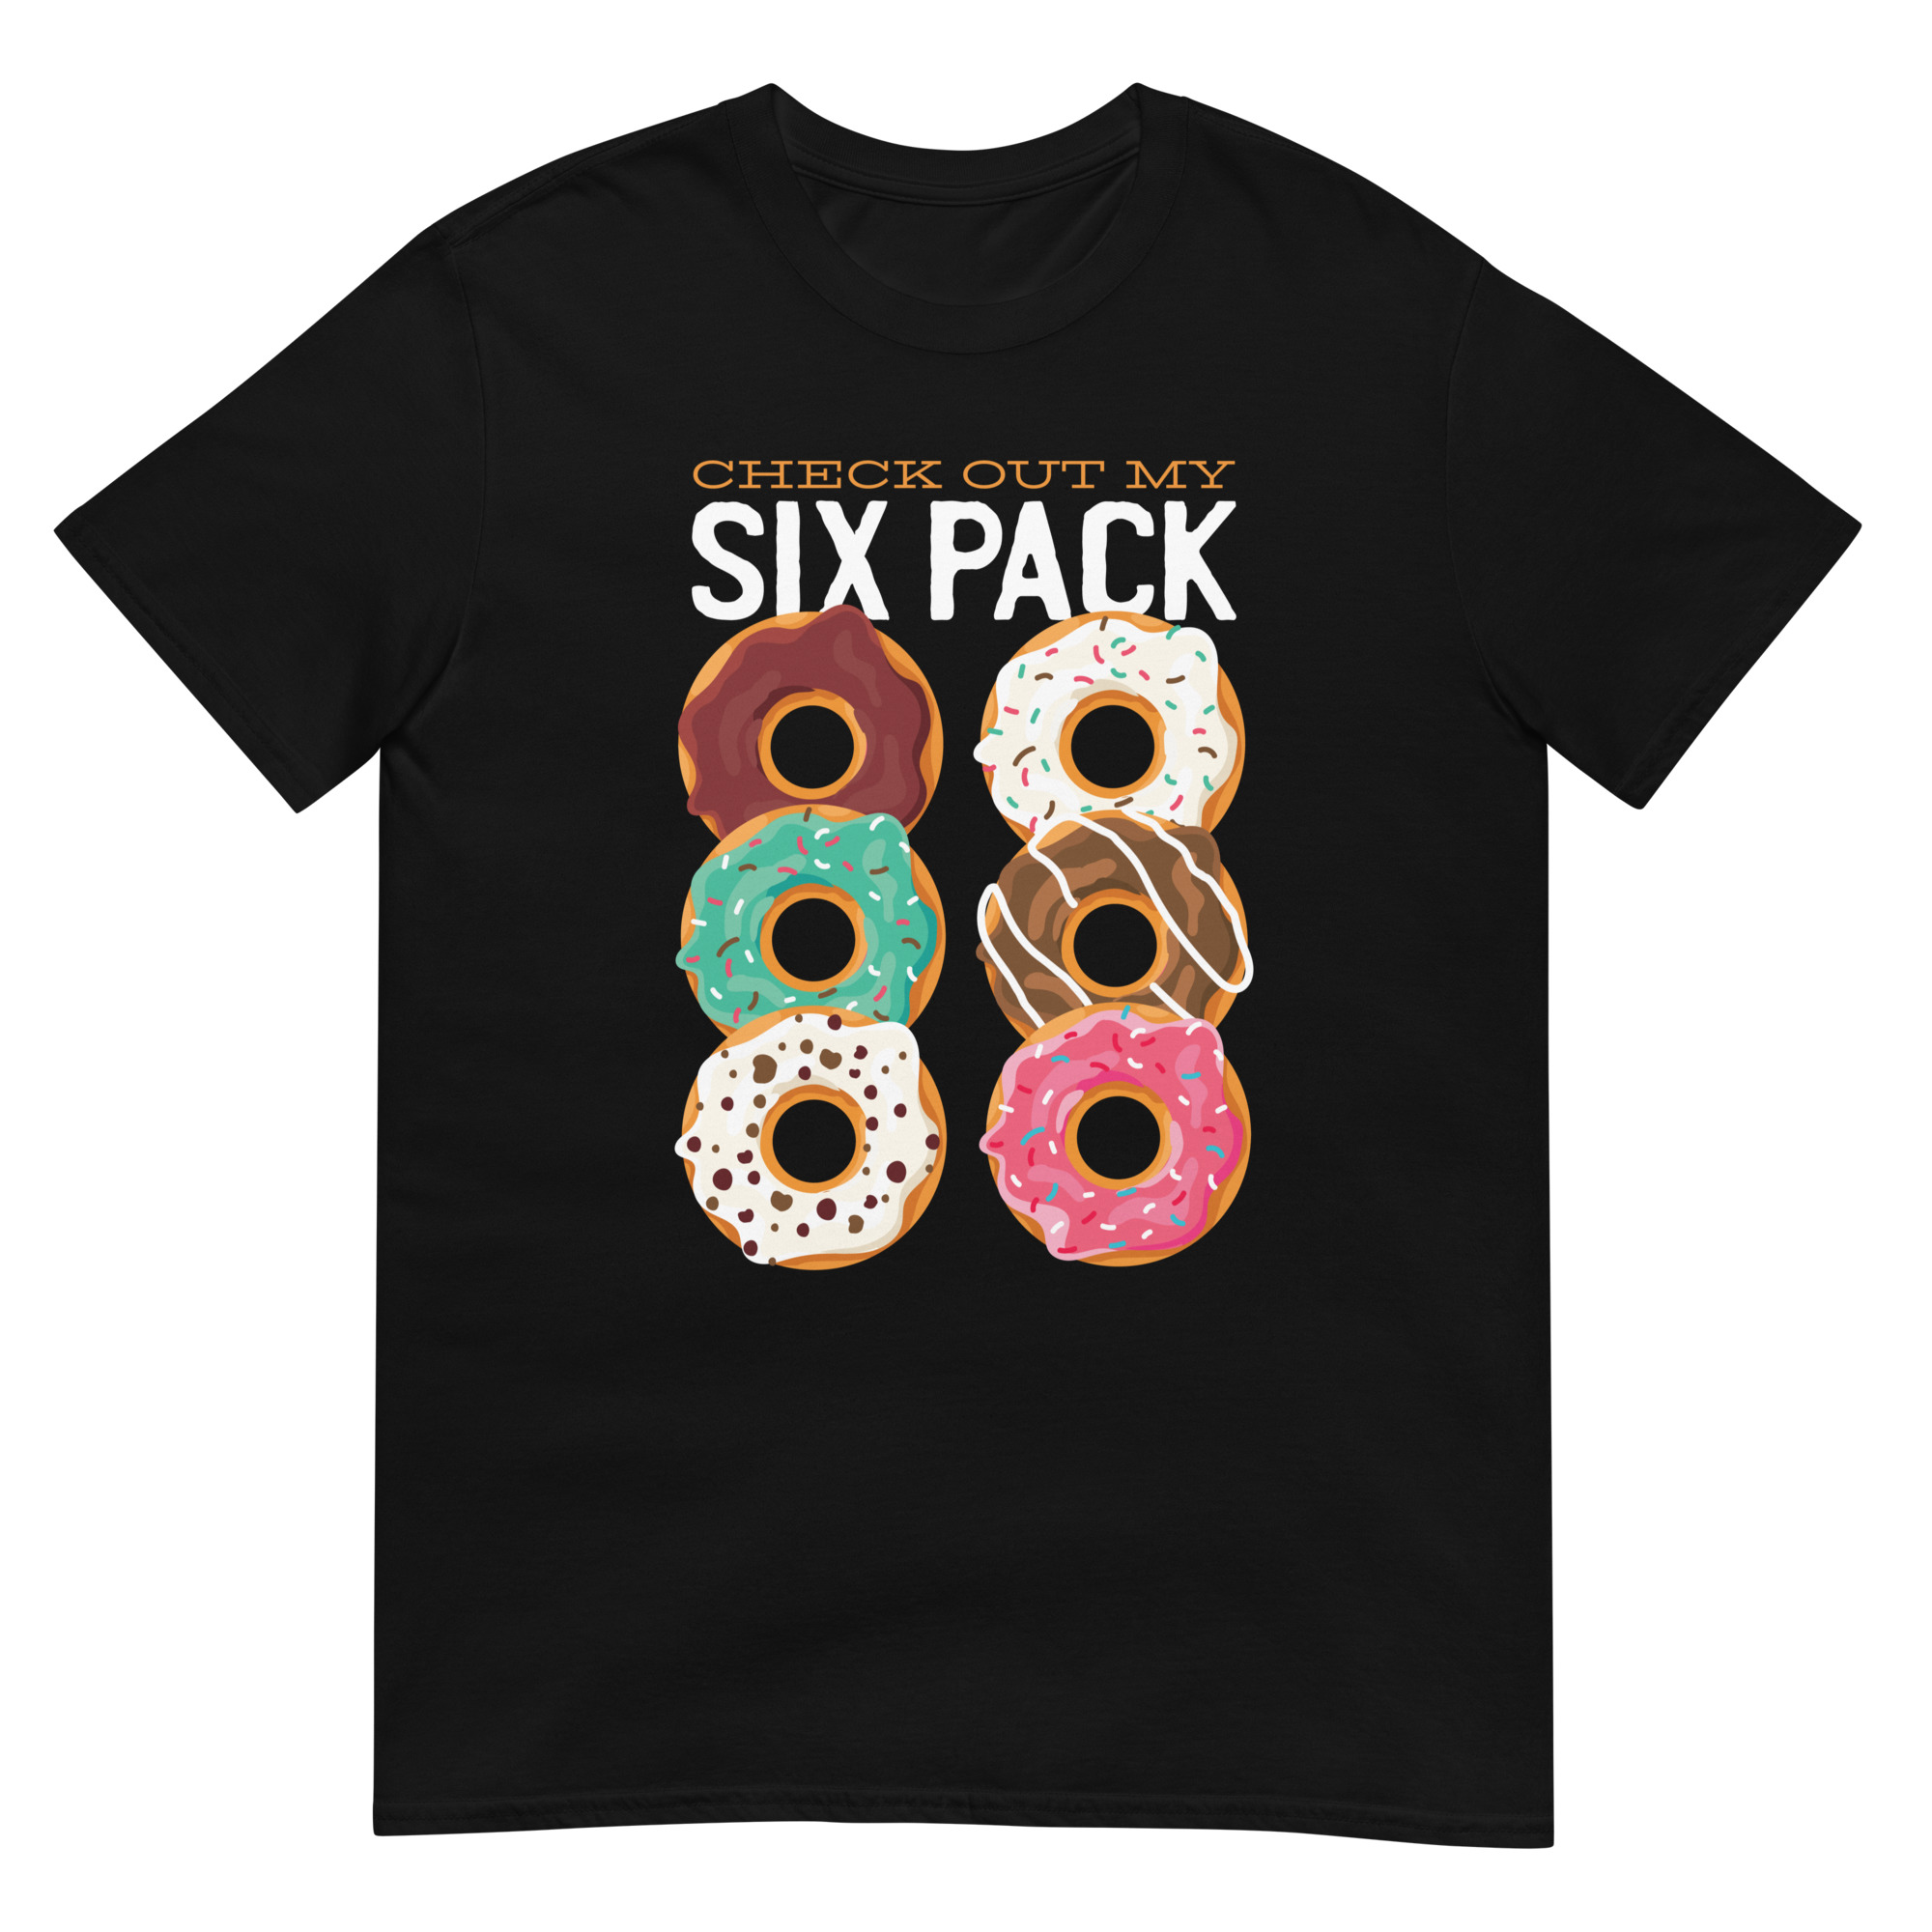 Check Out My Six Pack - Unisex Donut T-Shirt